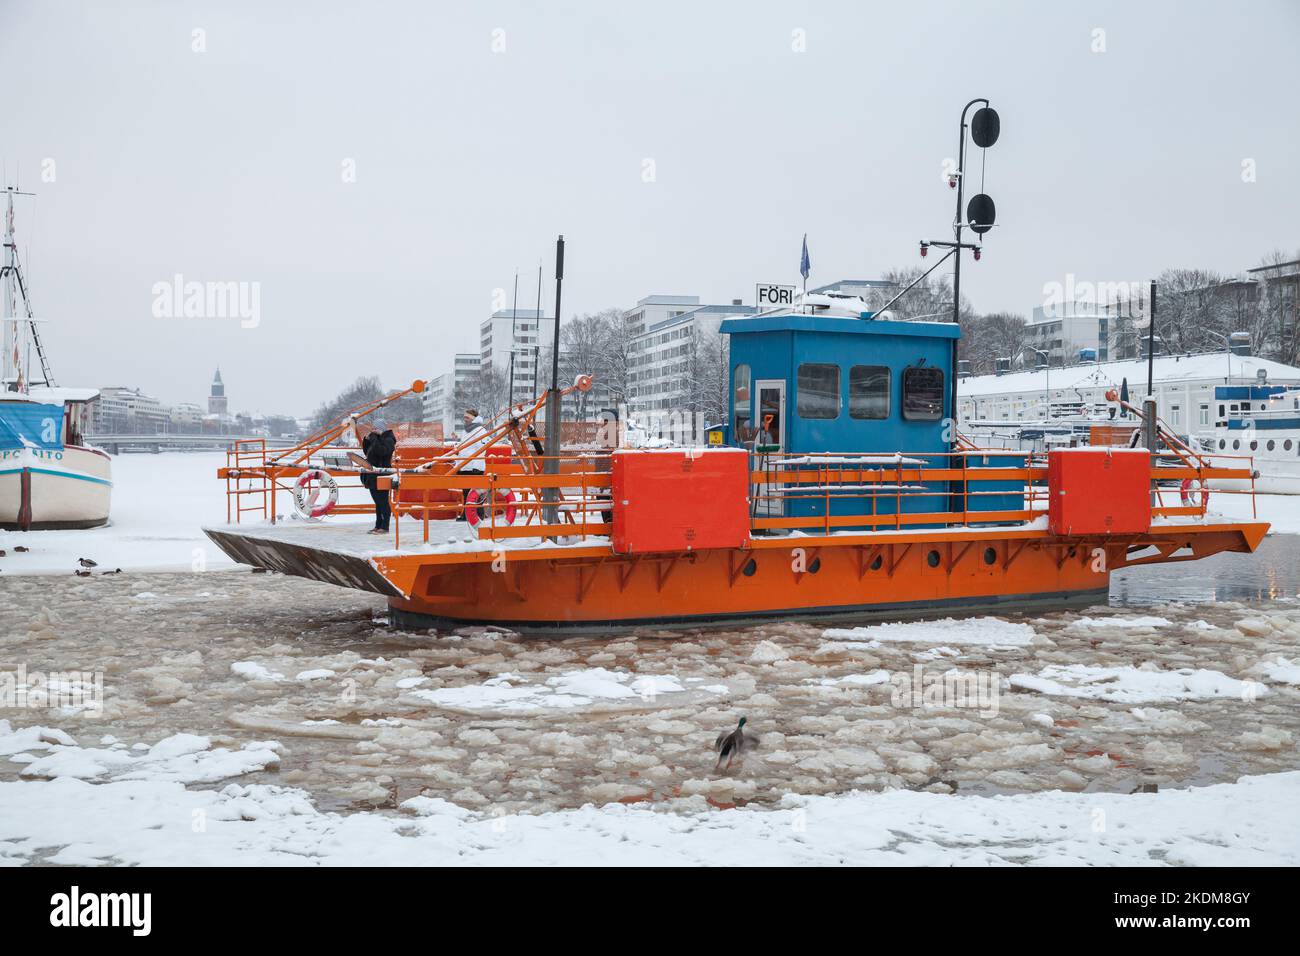 Turku, Finland - January 17, 2016: Passengers are on Fori city boat, this is a light traffic ferry that has served the Aura River for over a hundred y Stock Photo